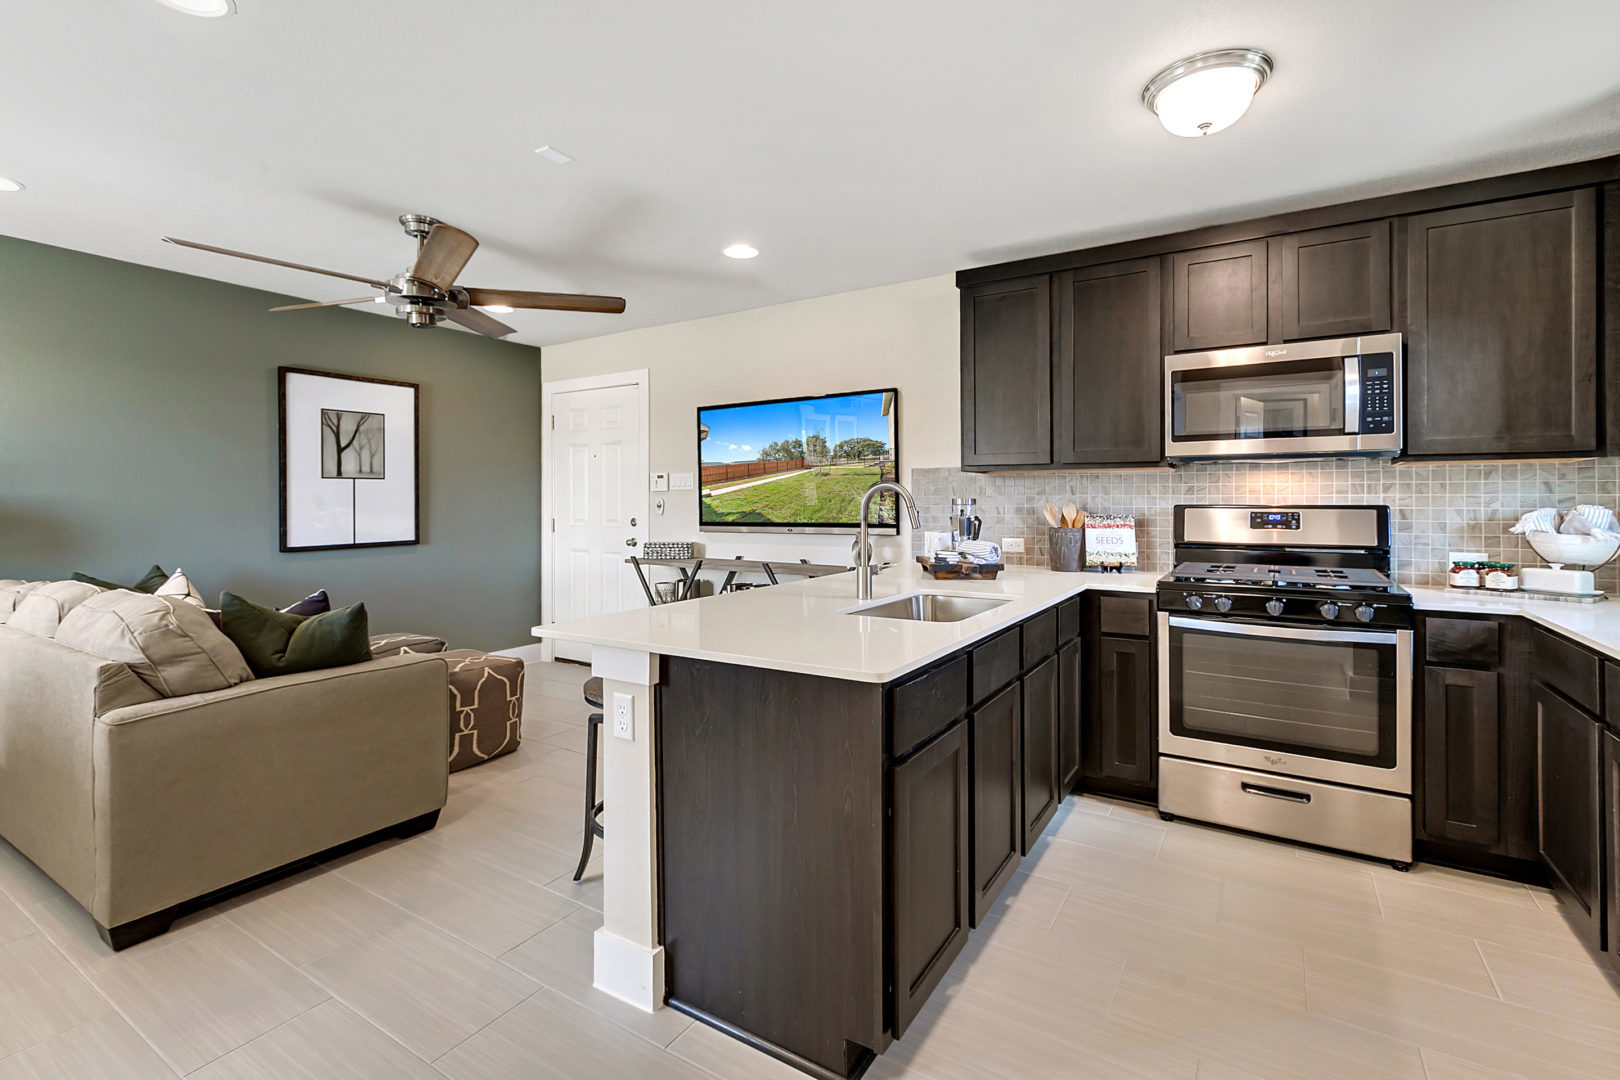 Valley Vista Community Model Home Kitchen And living Space